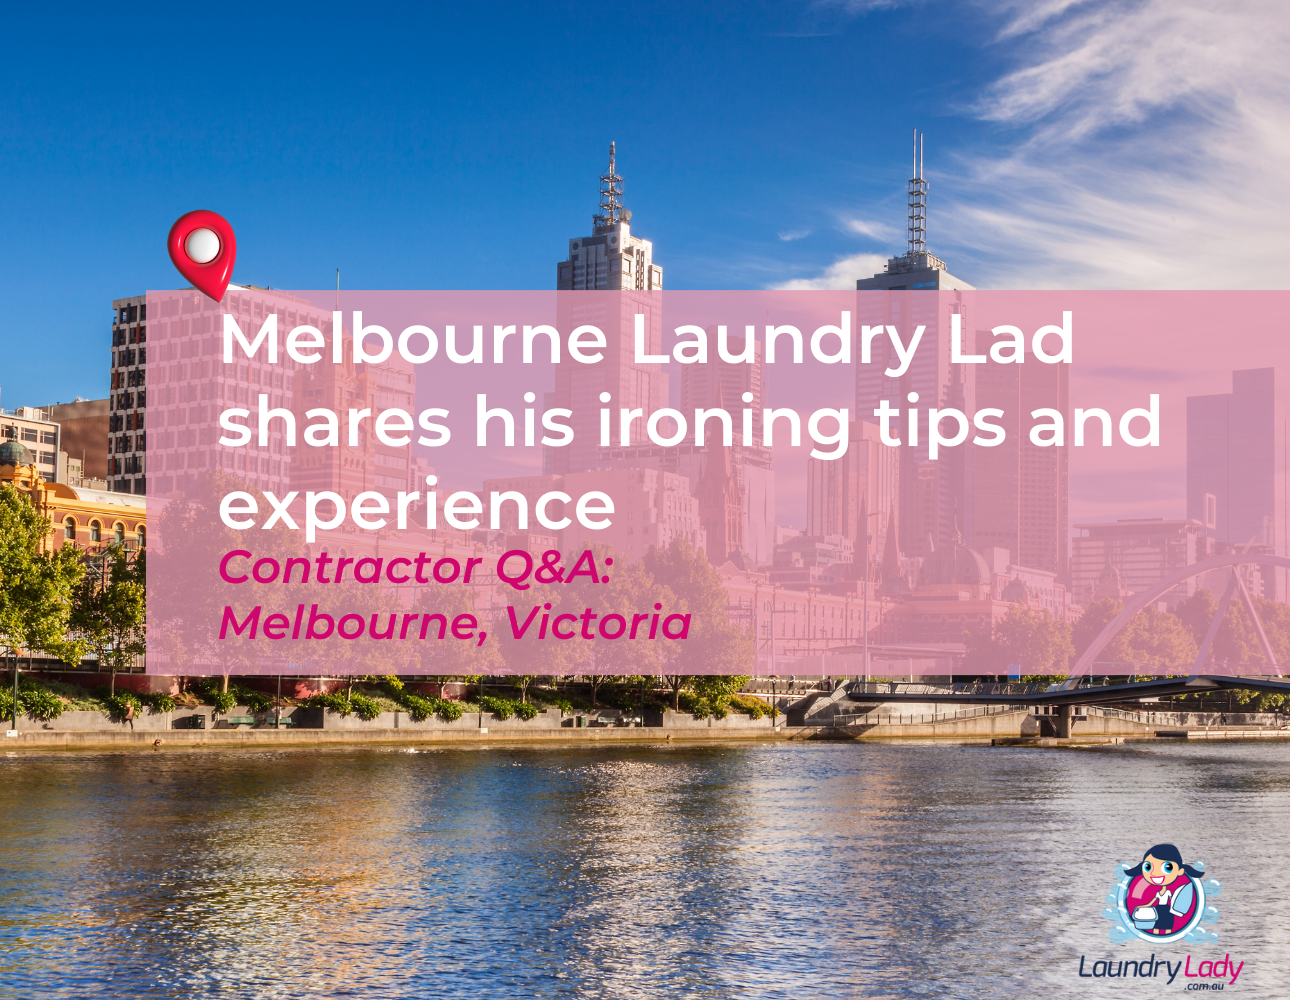 Laundry Lady services in Melbourne